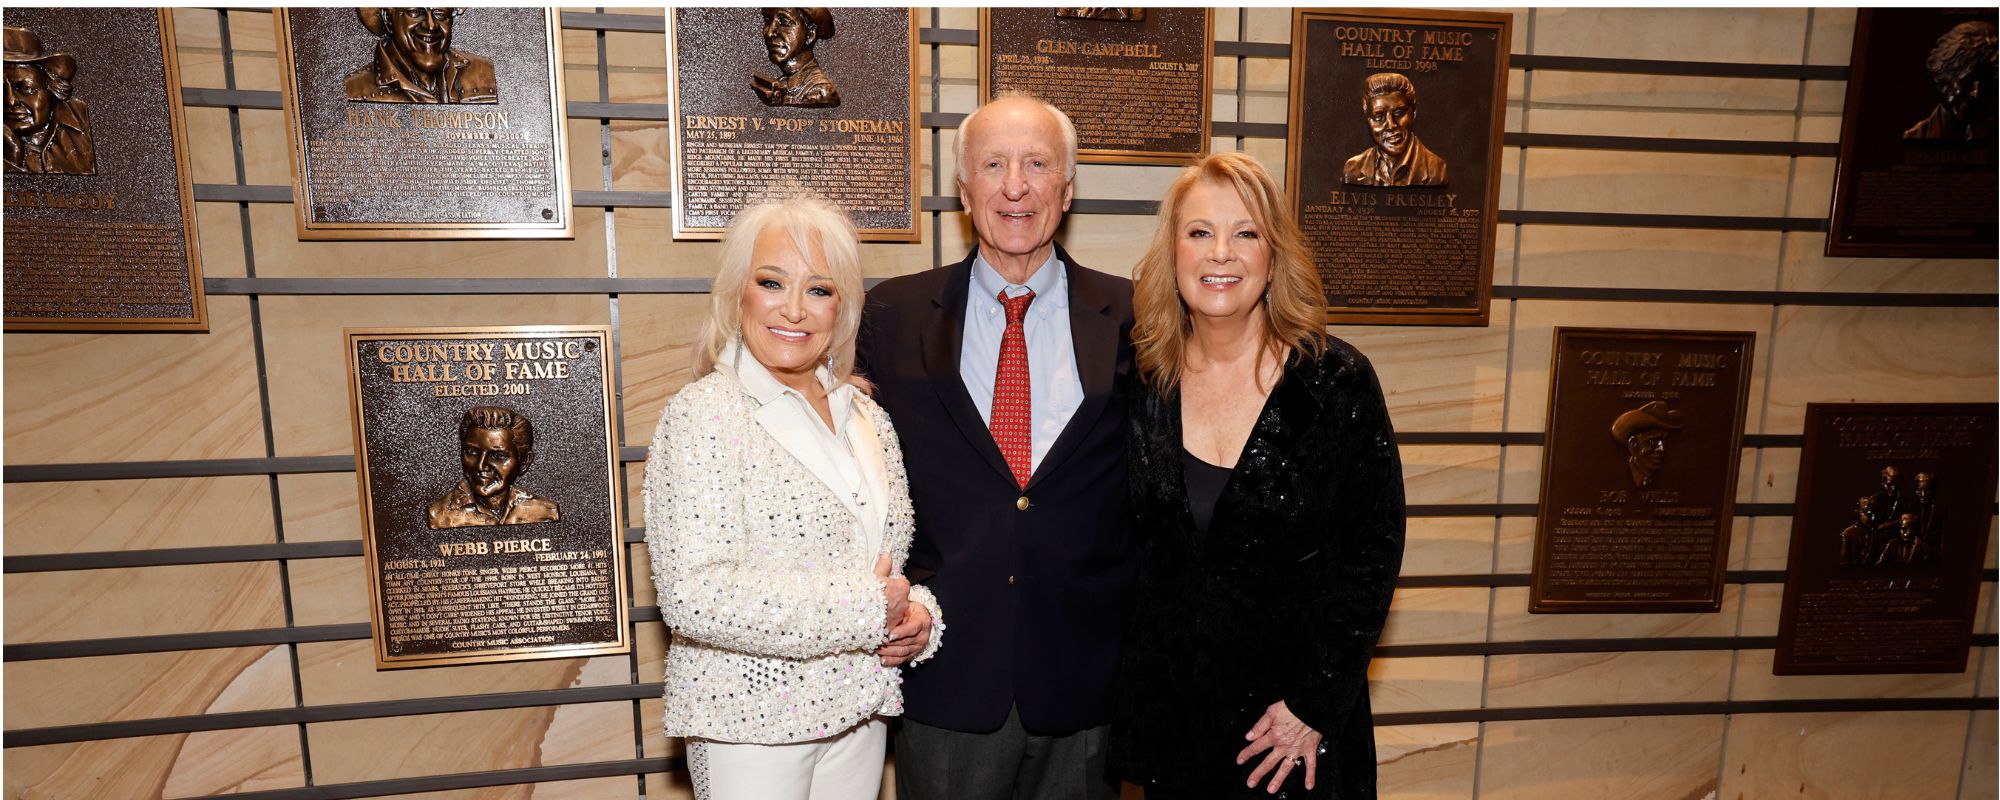 Bob McDill Offers Songwriting Advice, Patty Loveless Gets Emotional, and Tanya Tucker Leaps Onstage at Country Music Hall of Fame Induction